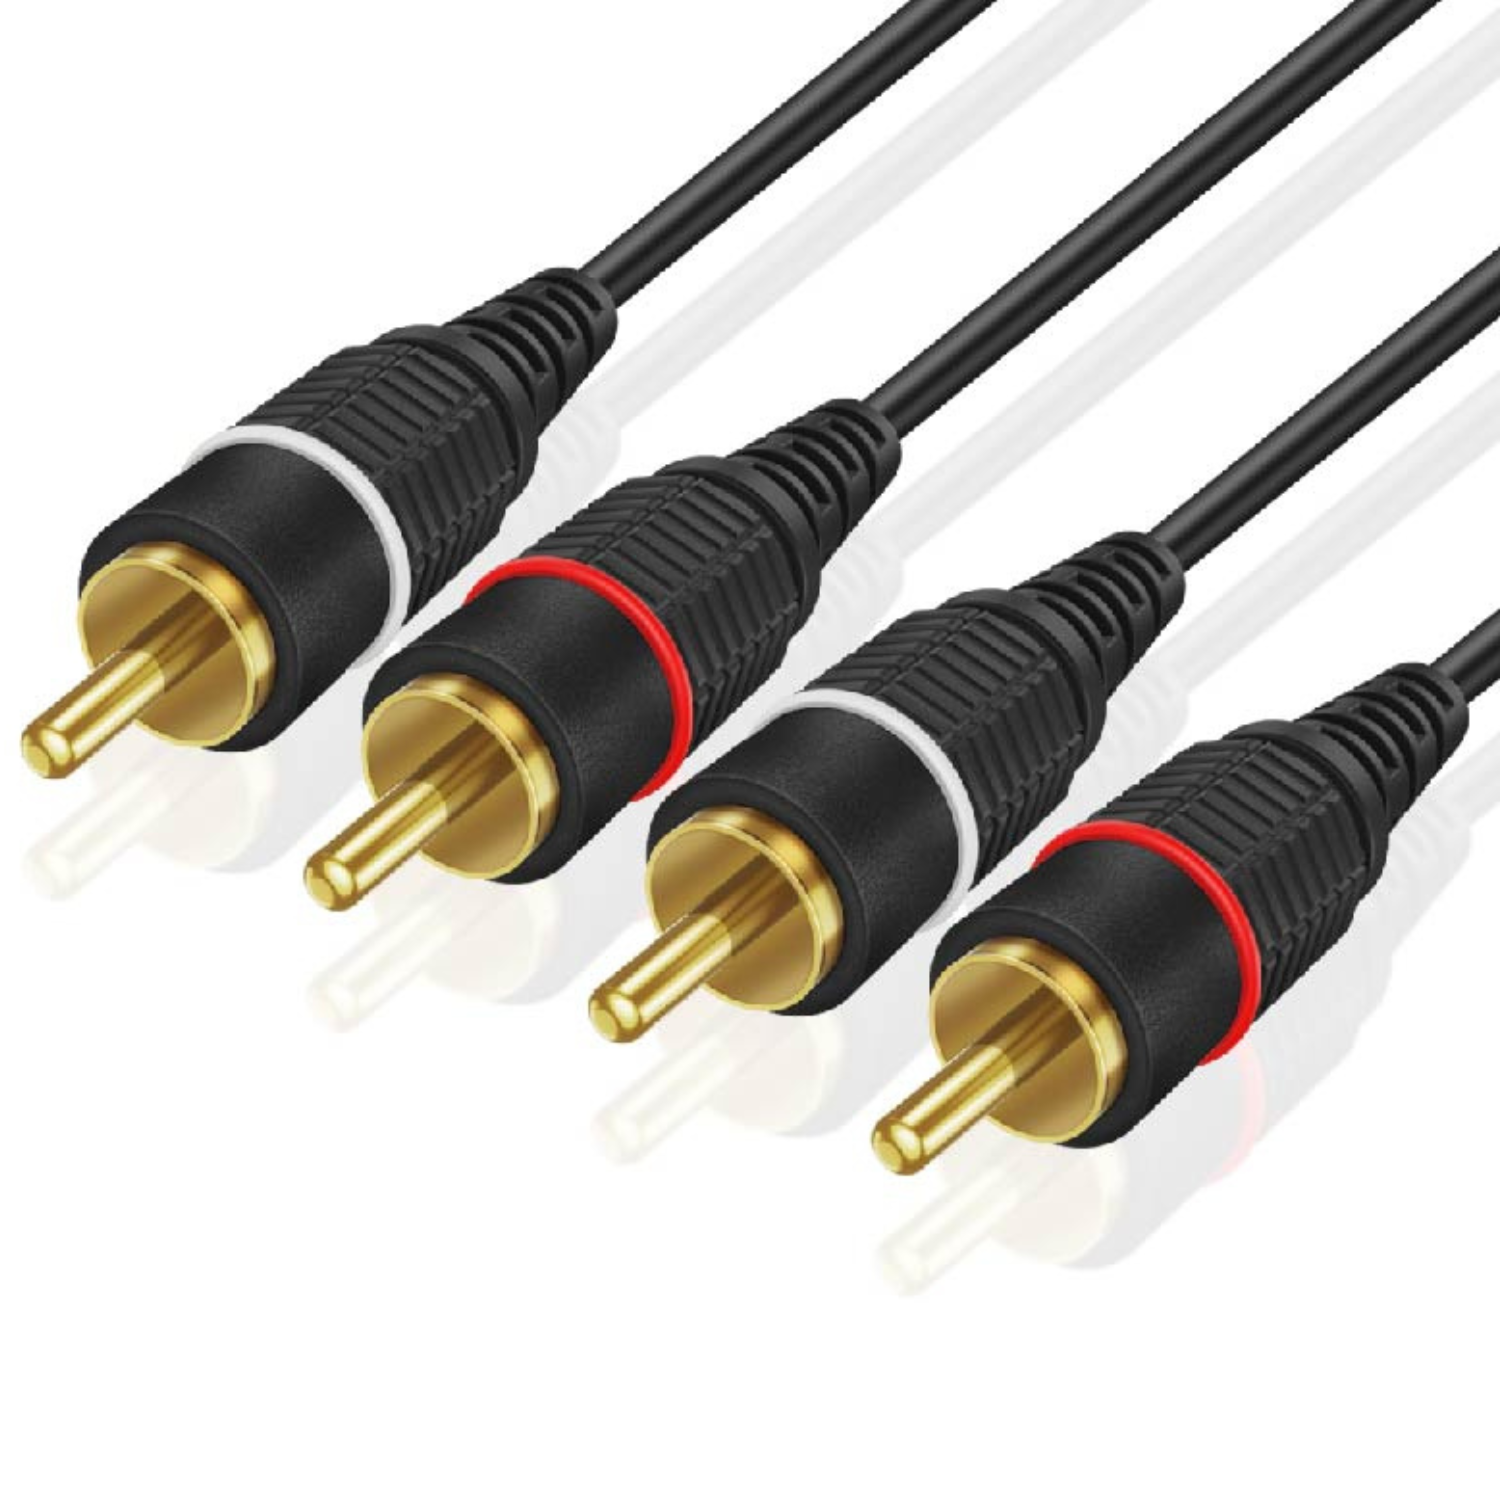 2RCA Stereo Audio Cable (6 Feet) - Dual RCA Plug M/M 2 Channel (Right and Left) Gold Plated Dual Shielded RCA to RCA Male Connectors Black - image 1 of 6